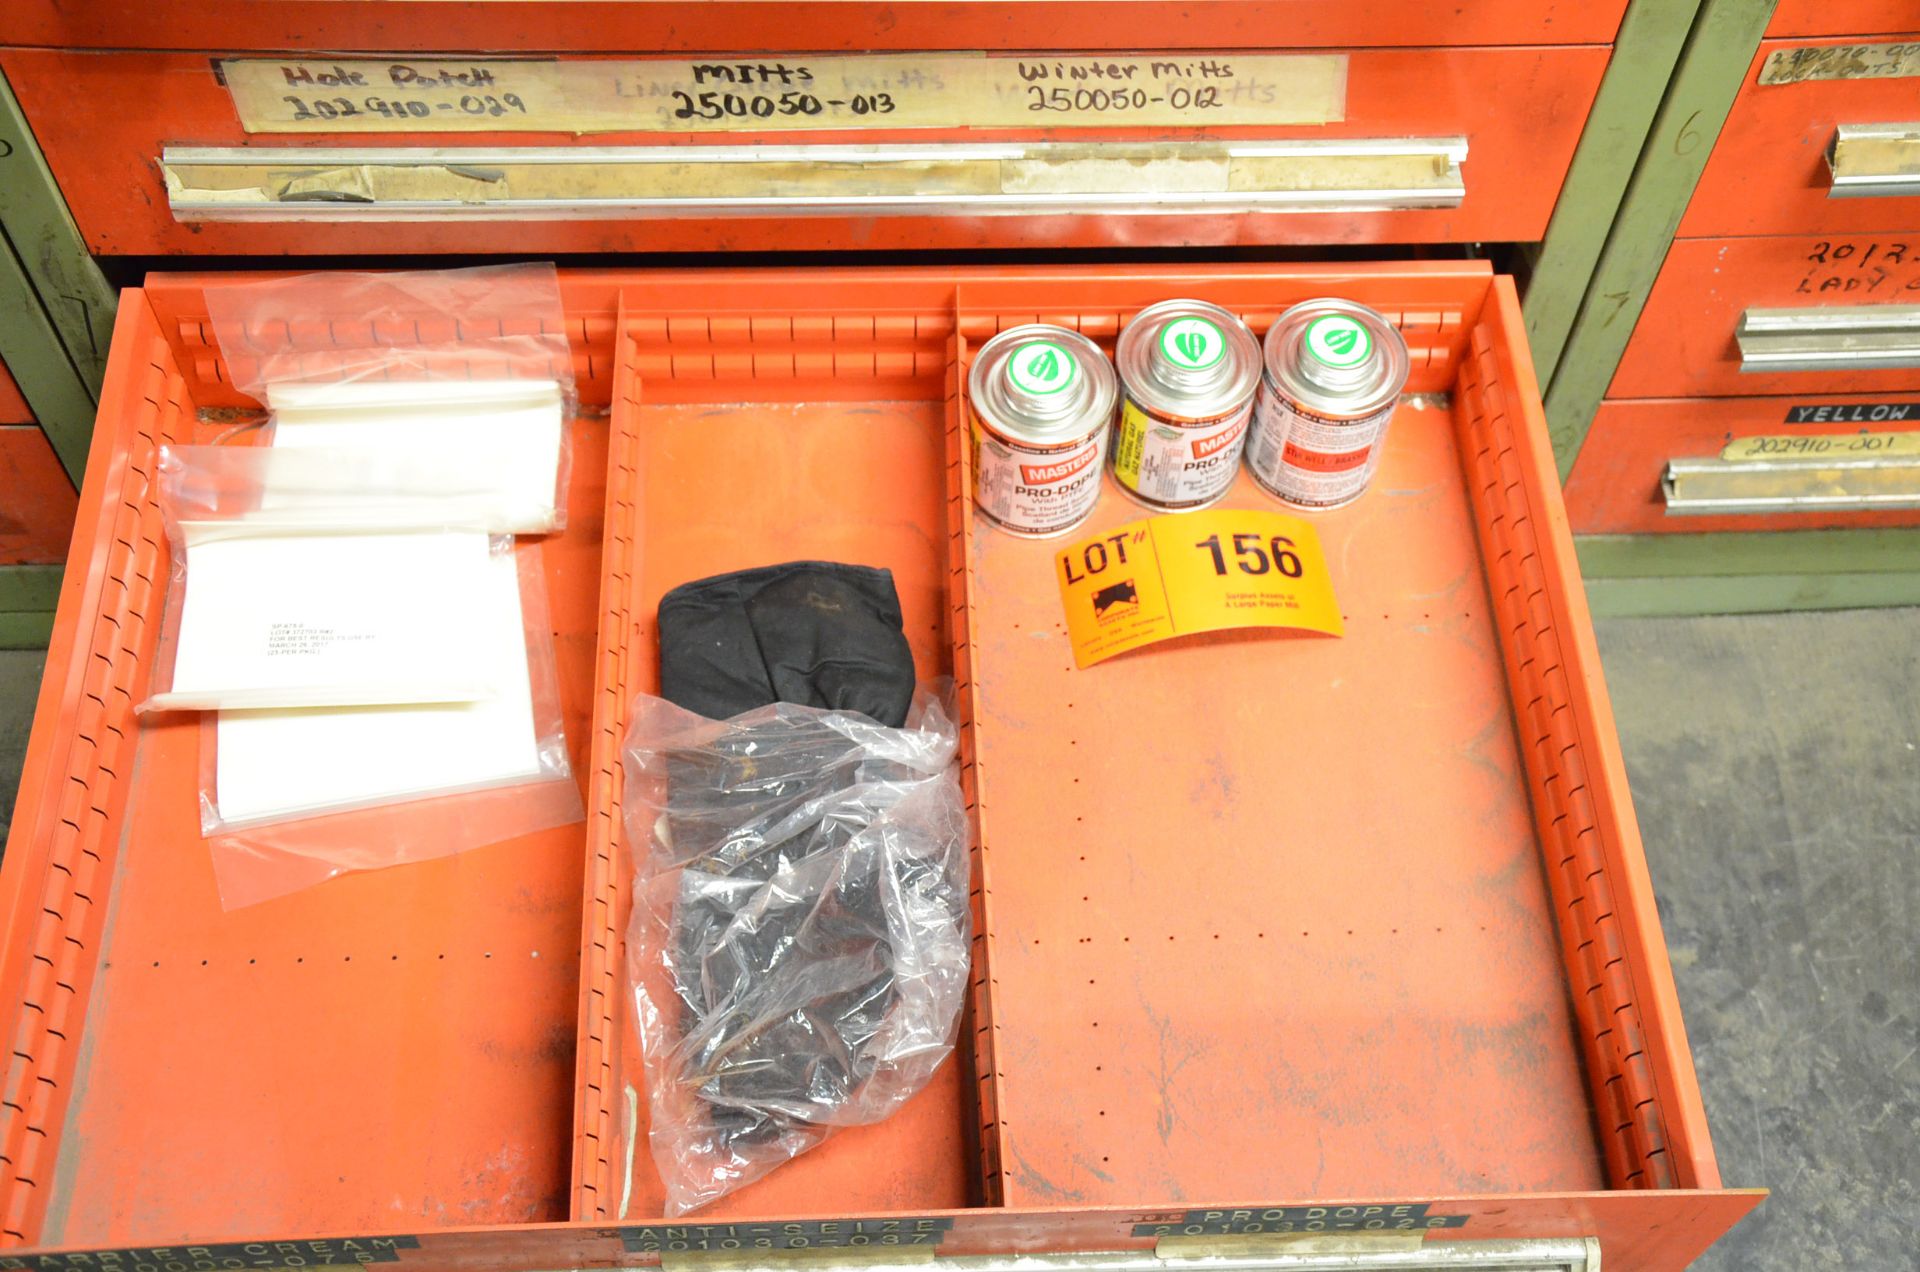 LOT/ CONTENTS OF CABINET - INCLUDING MASKING TAPE, GRINDING WHEELS, HOOD LINERS, WINTER GLOVES, - Image 4 of 5